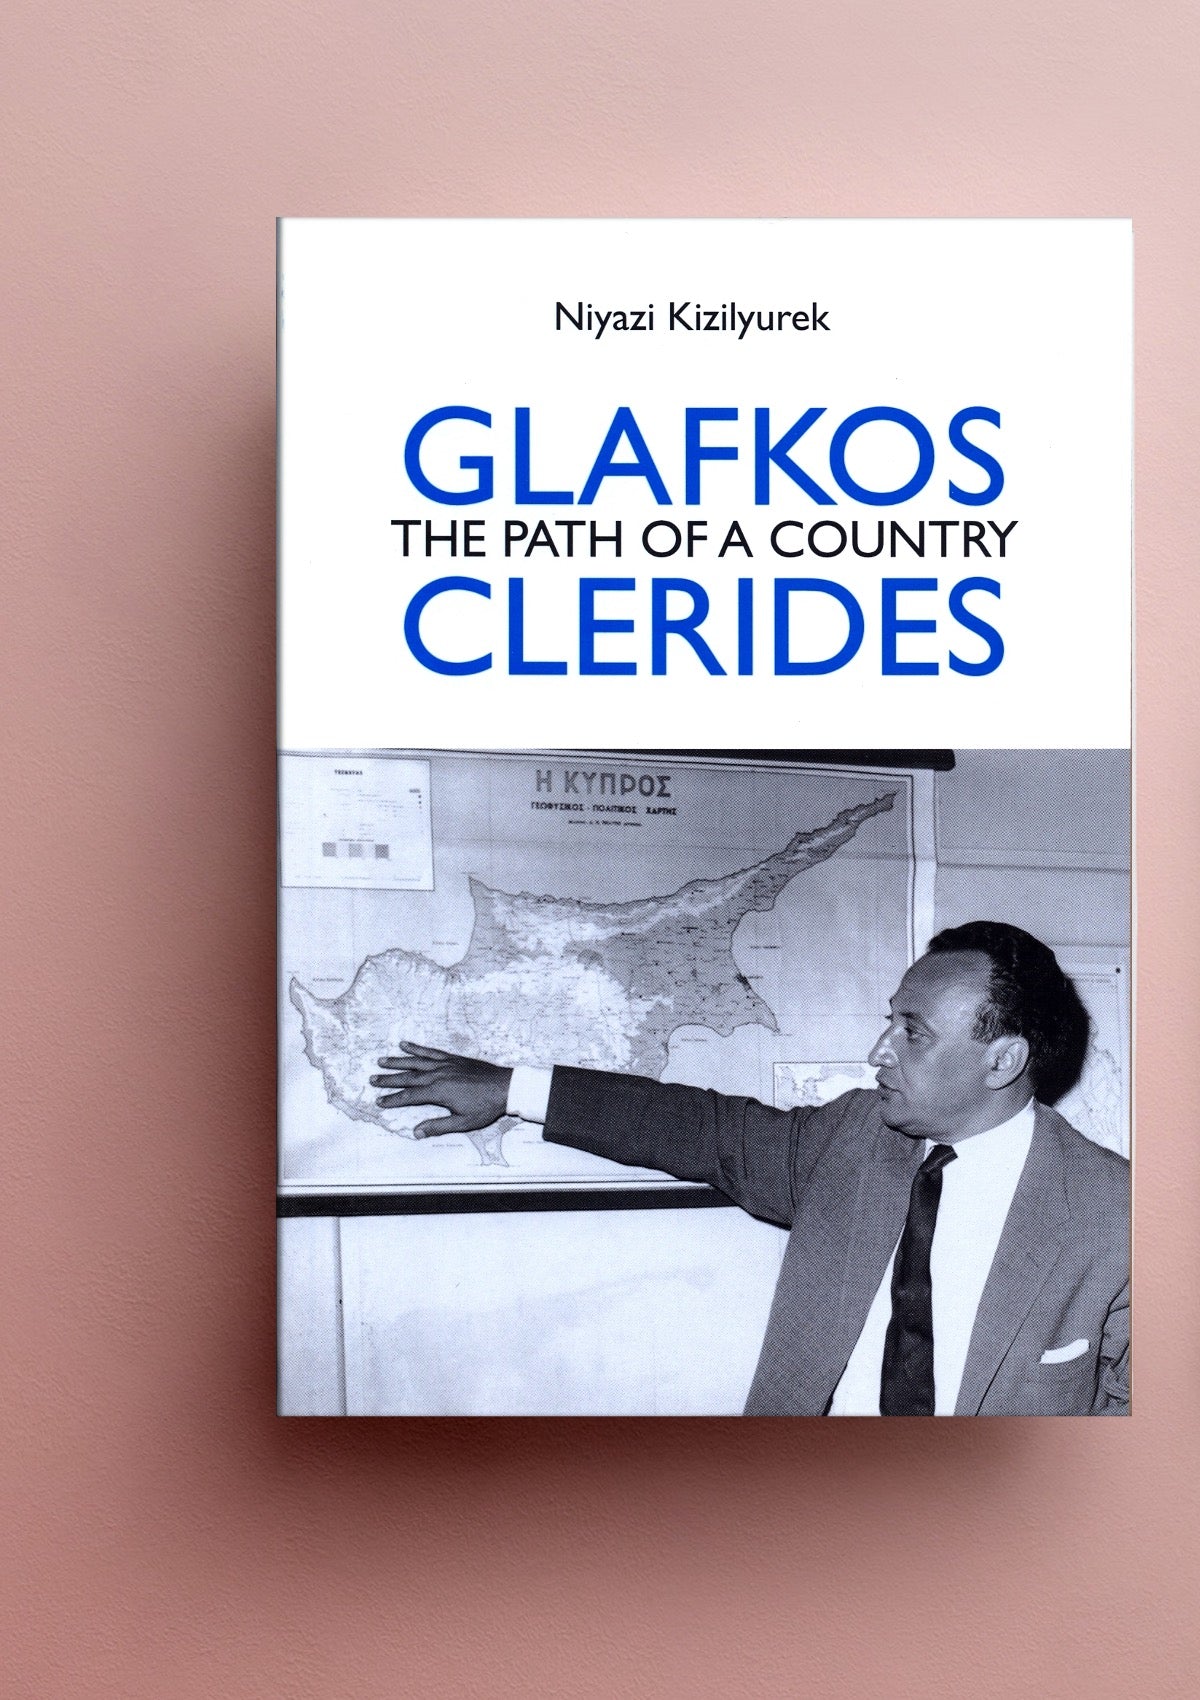 Glafkos Clerides: The Path of a Country